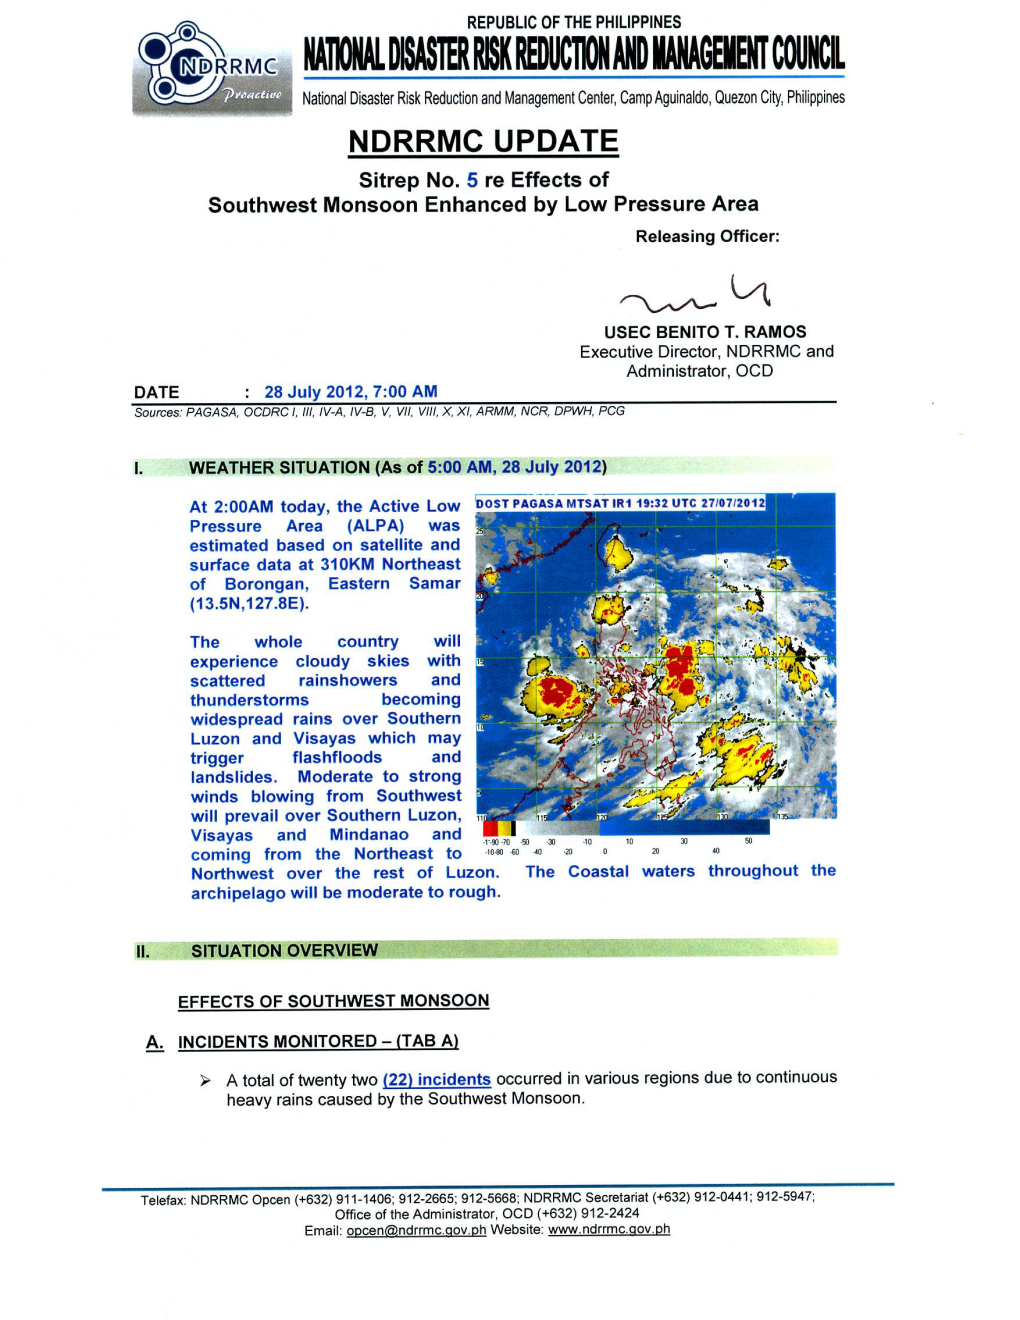 NDRRMC UPDATE Sitrep 05 Re Effects of SW Monsoon As of 28